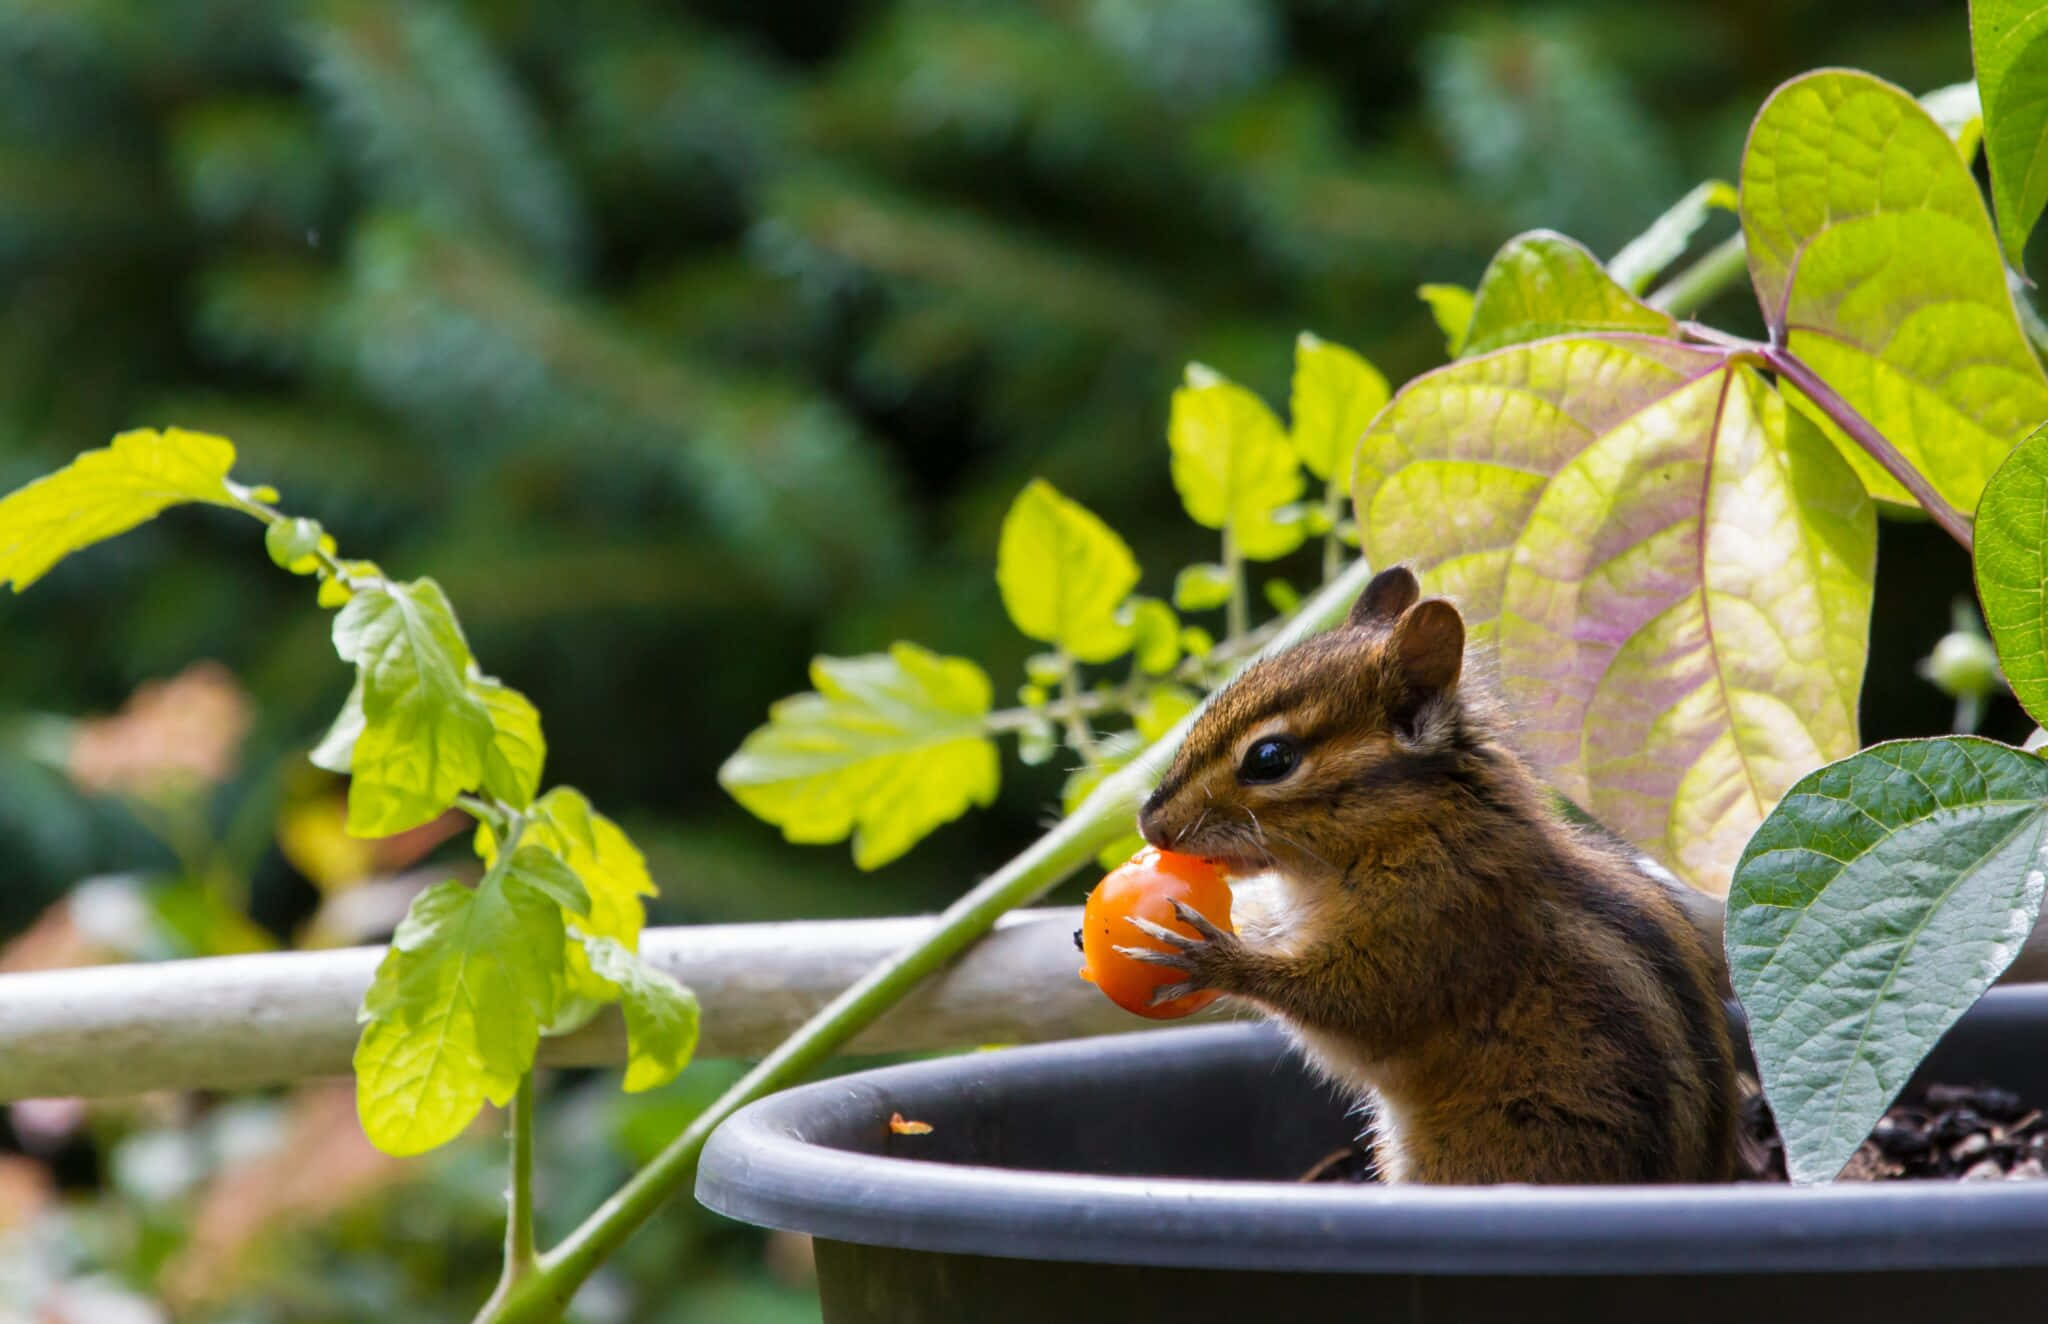 A cute Chipmunk with a basket of colorful autumn leaves.